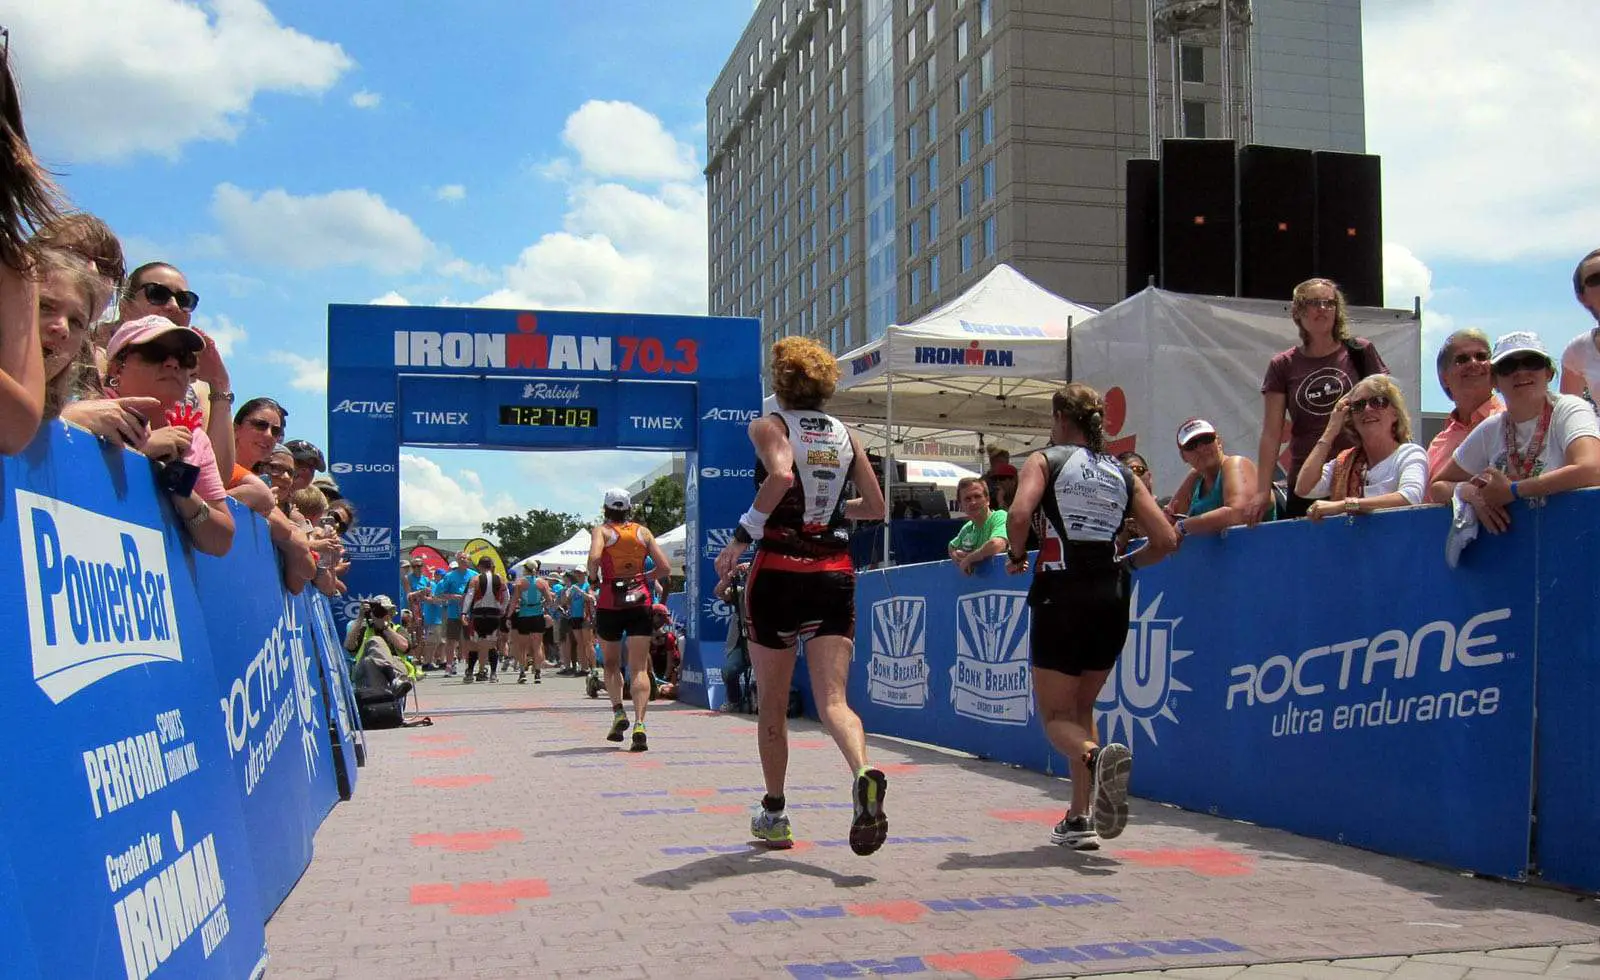 atheletes at an ironman competition